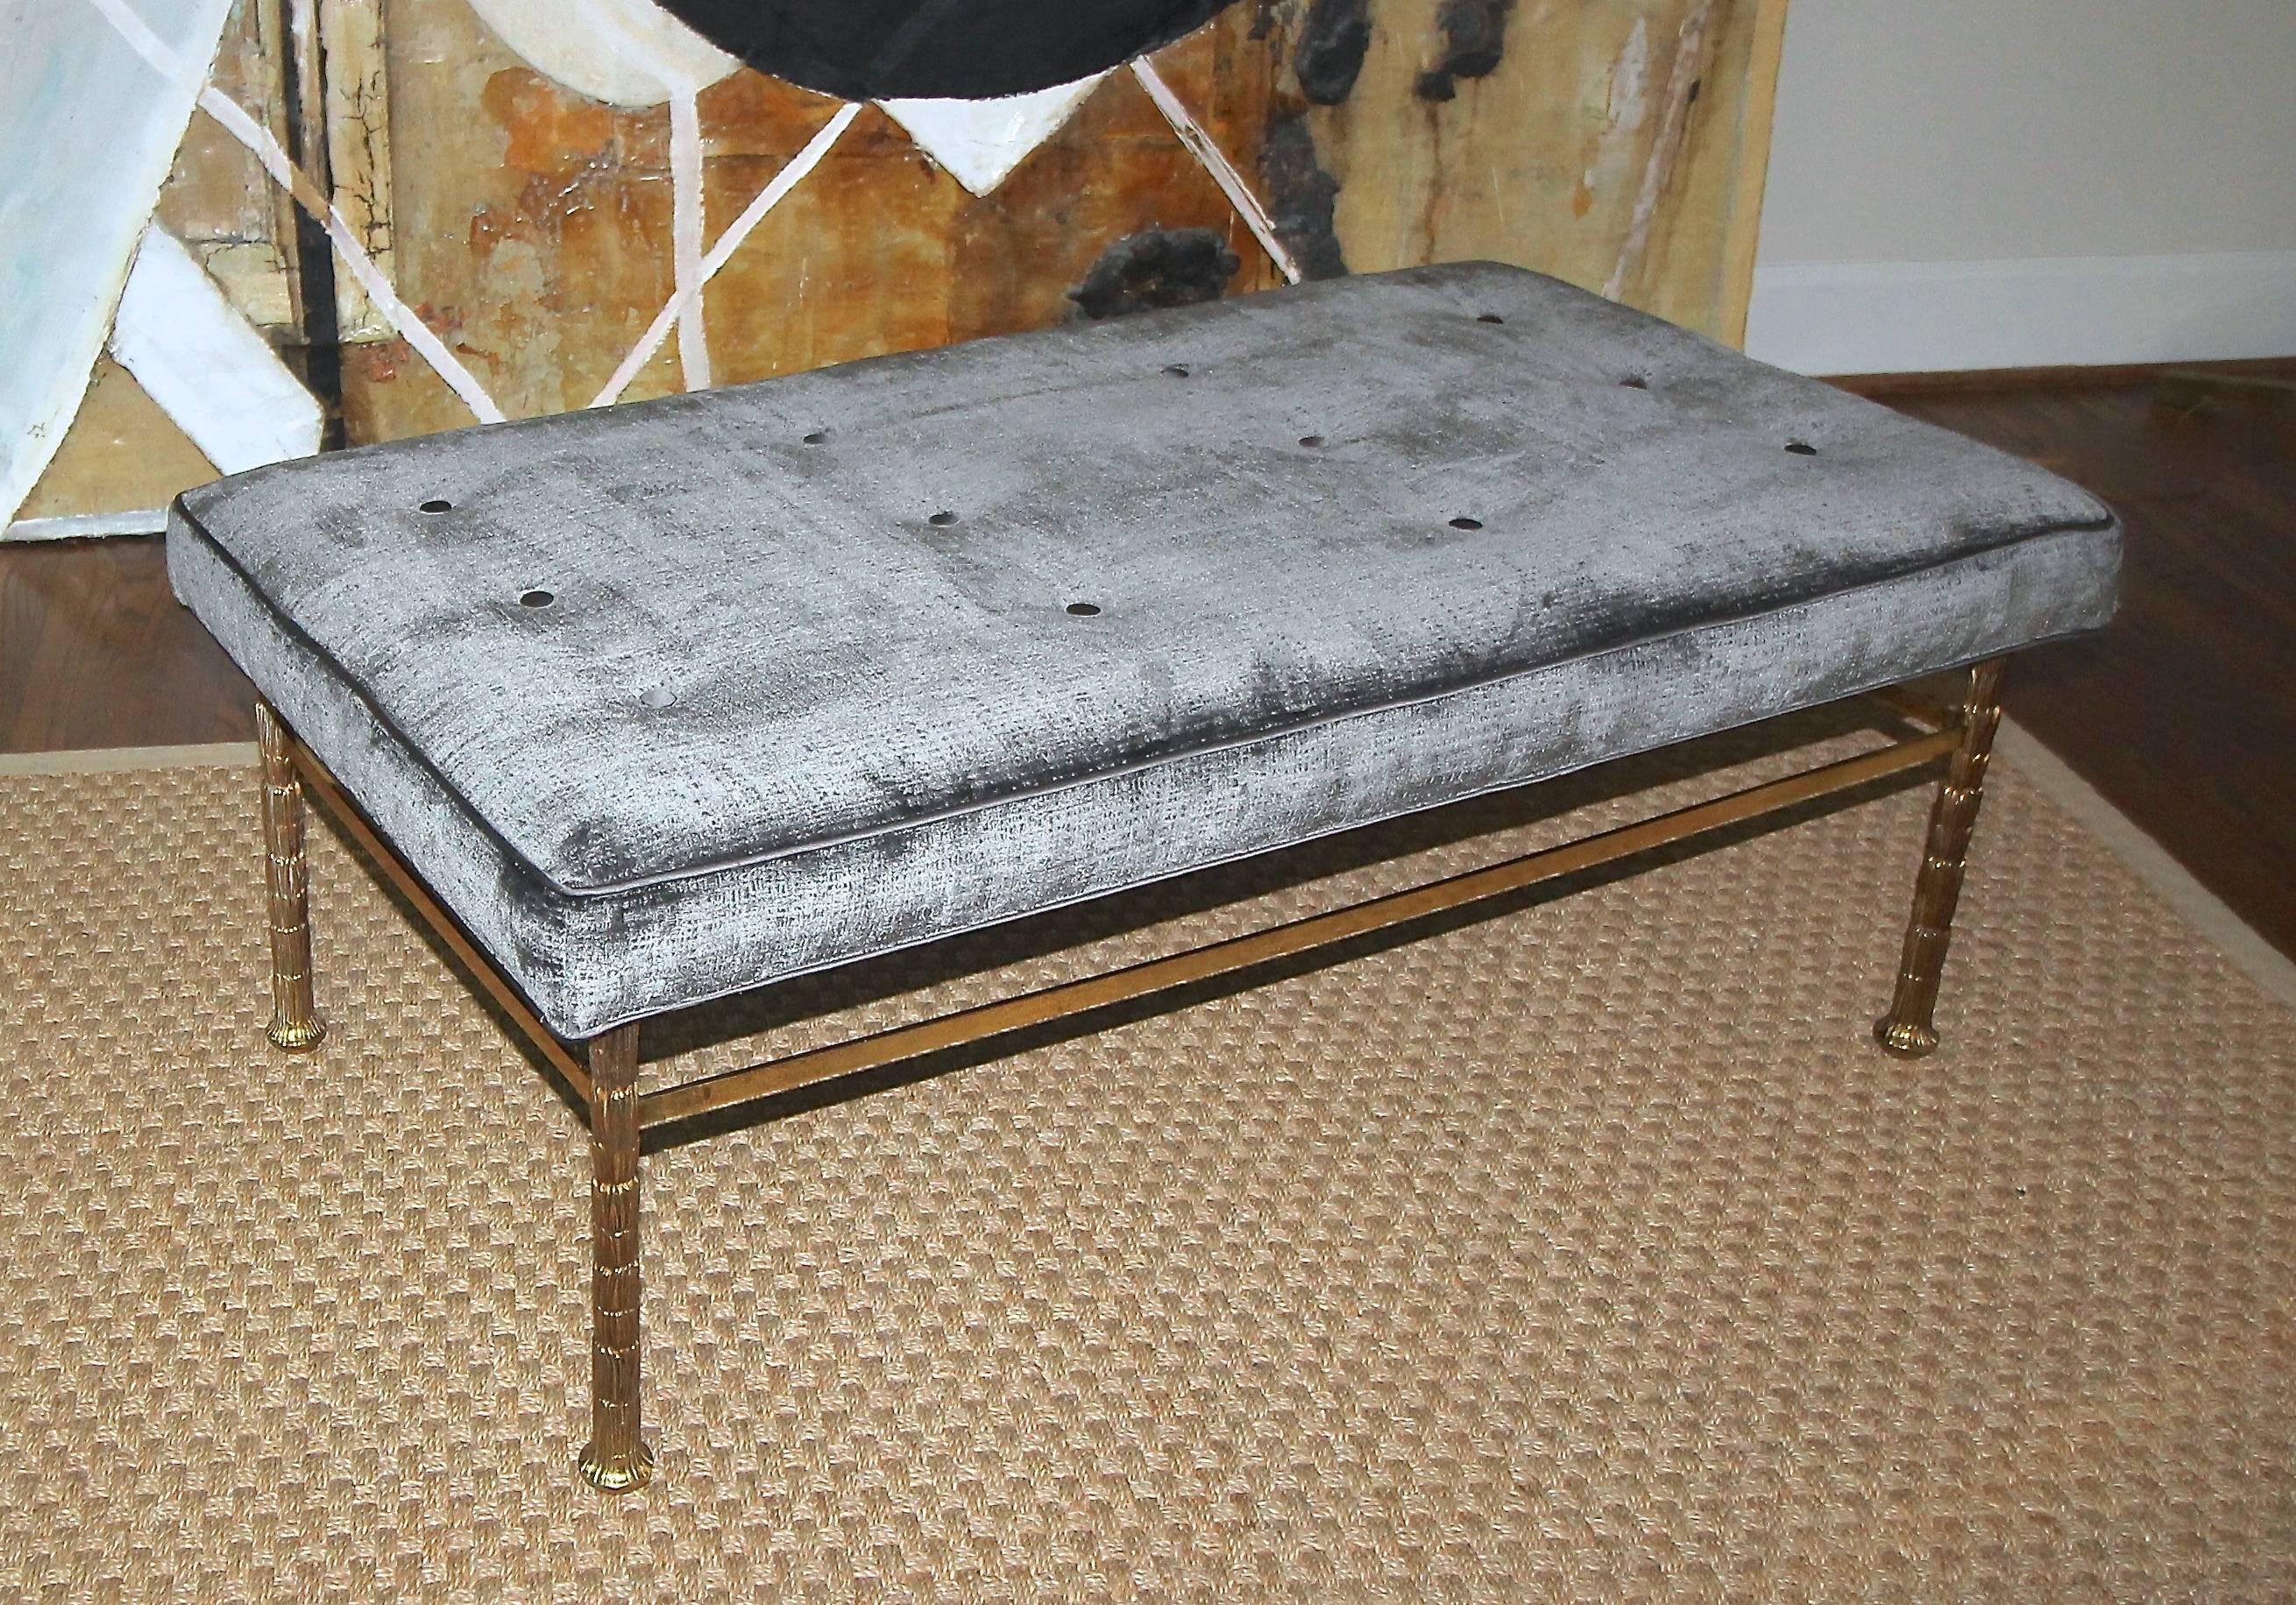 Superb quality Maison Jansen bronze upholstered bench. The legs have a beautifully detailed palm trunk motif. Newly upholstered in grey velvet fabric with matching satin trim and tufted buttons.